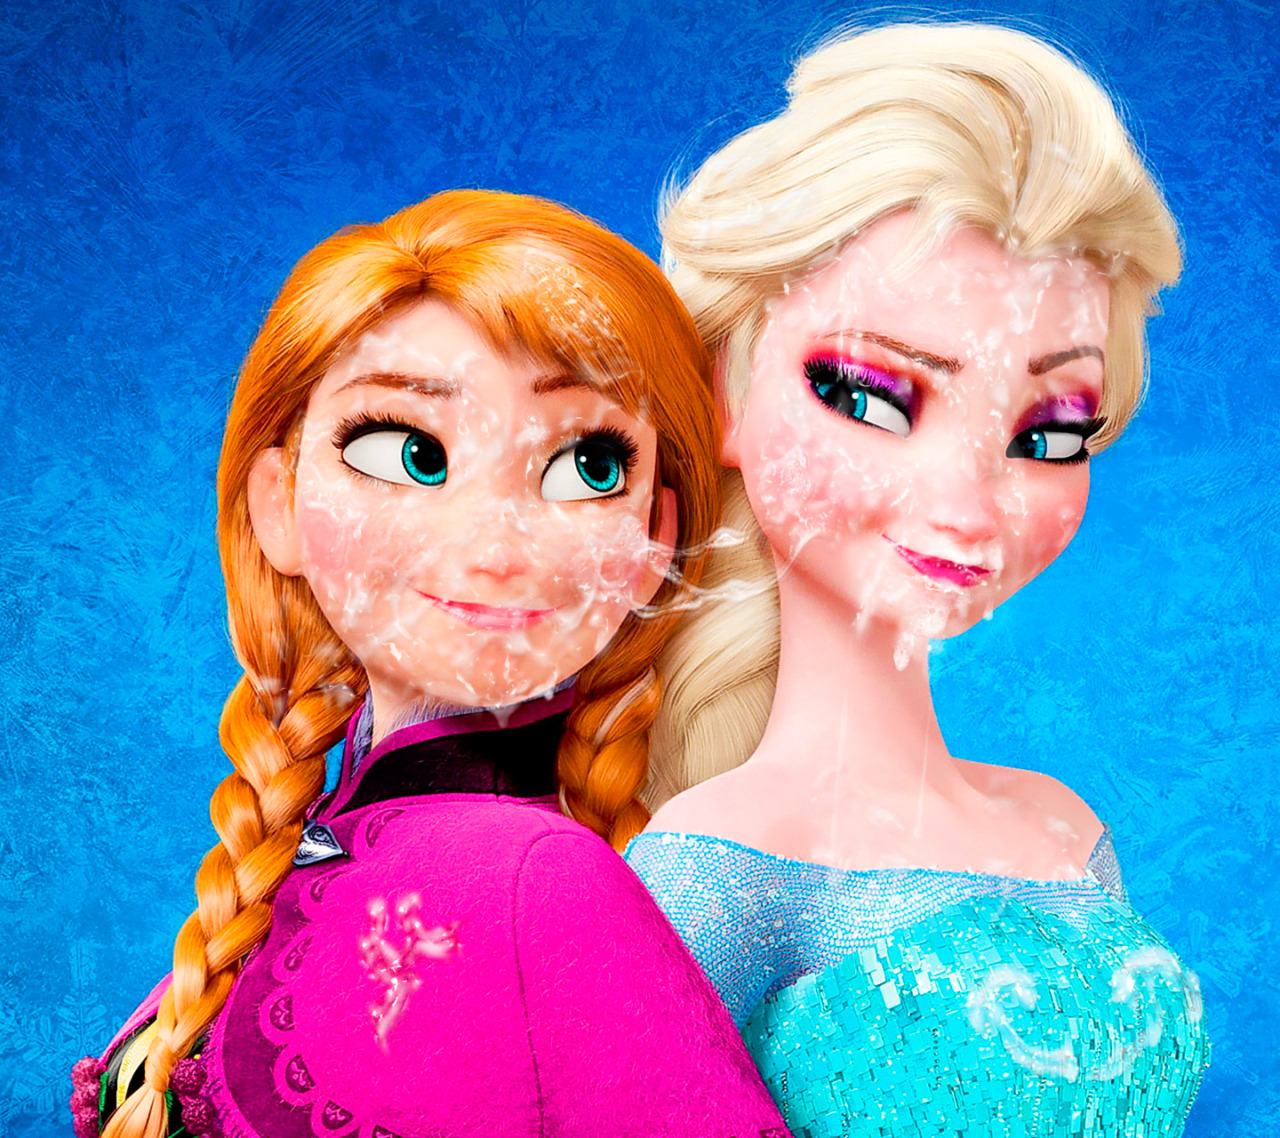 ardham-edits:  Elsa and Anna got a messy bukkake together.  -  Being two sisters